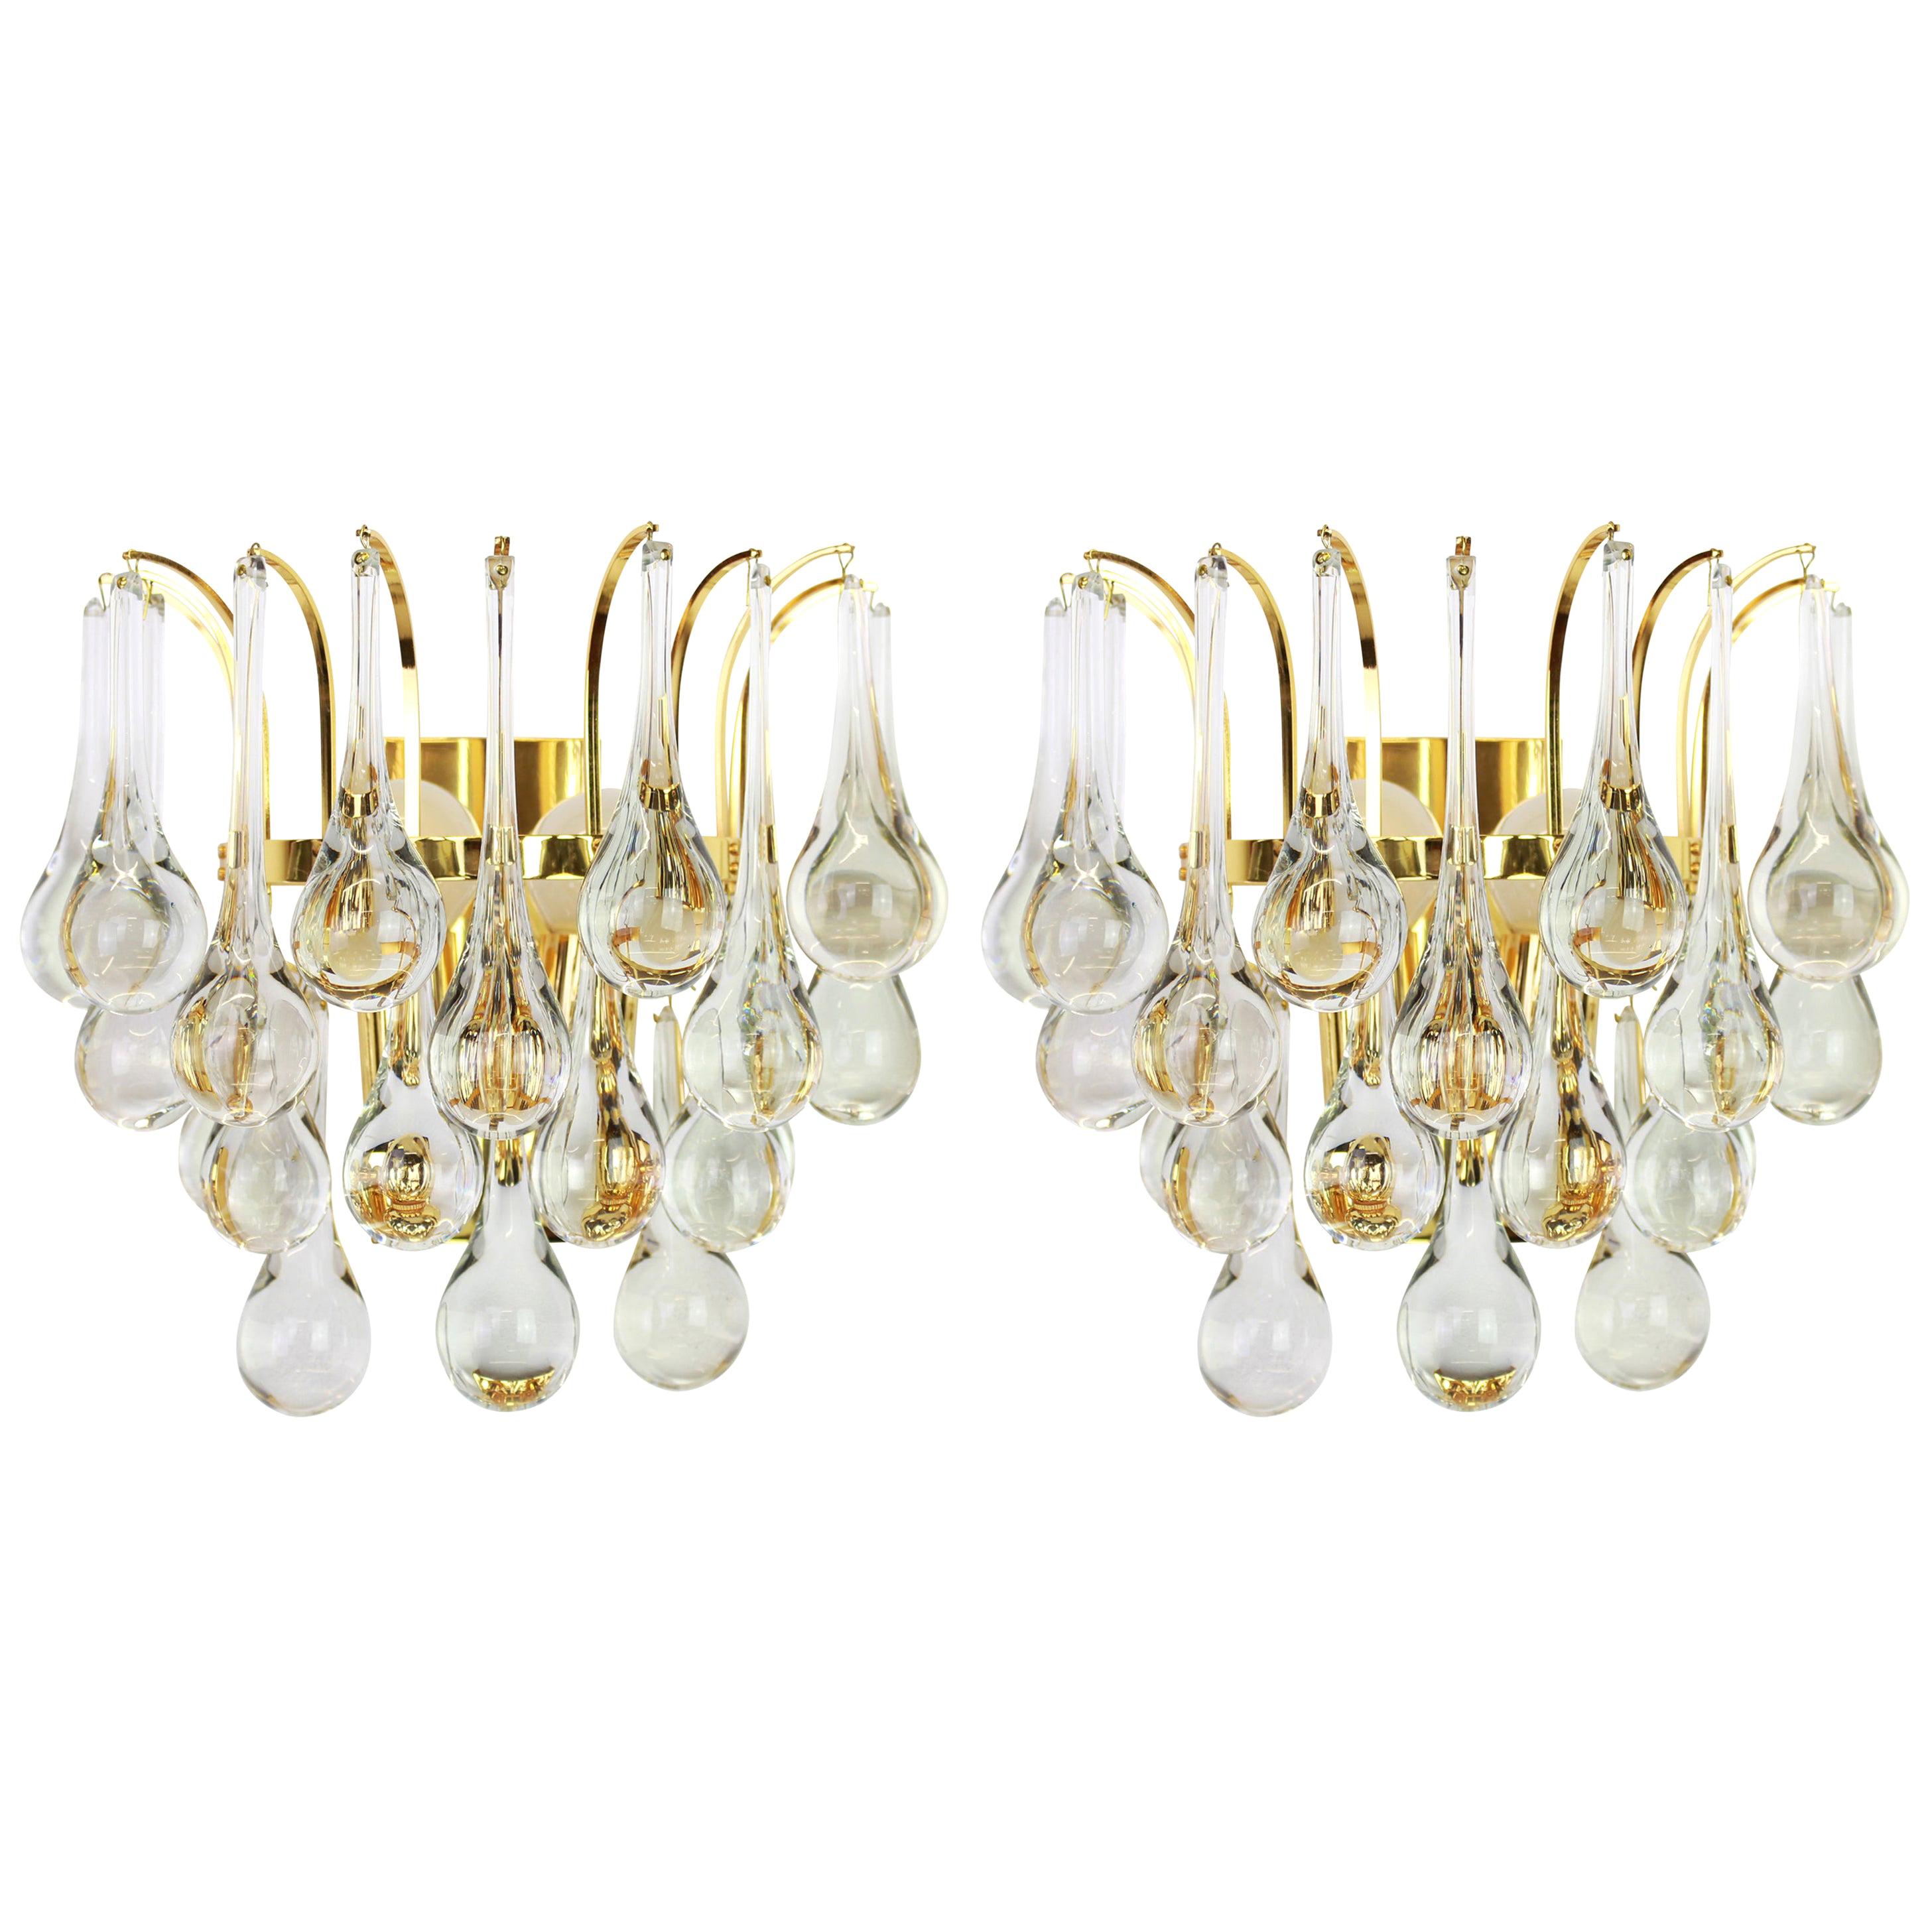 Large Pair of Golden Gilded Brass and Crystal Sconces by Palwa, Germany, 1970s For Sale